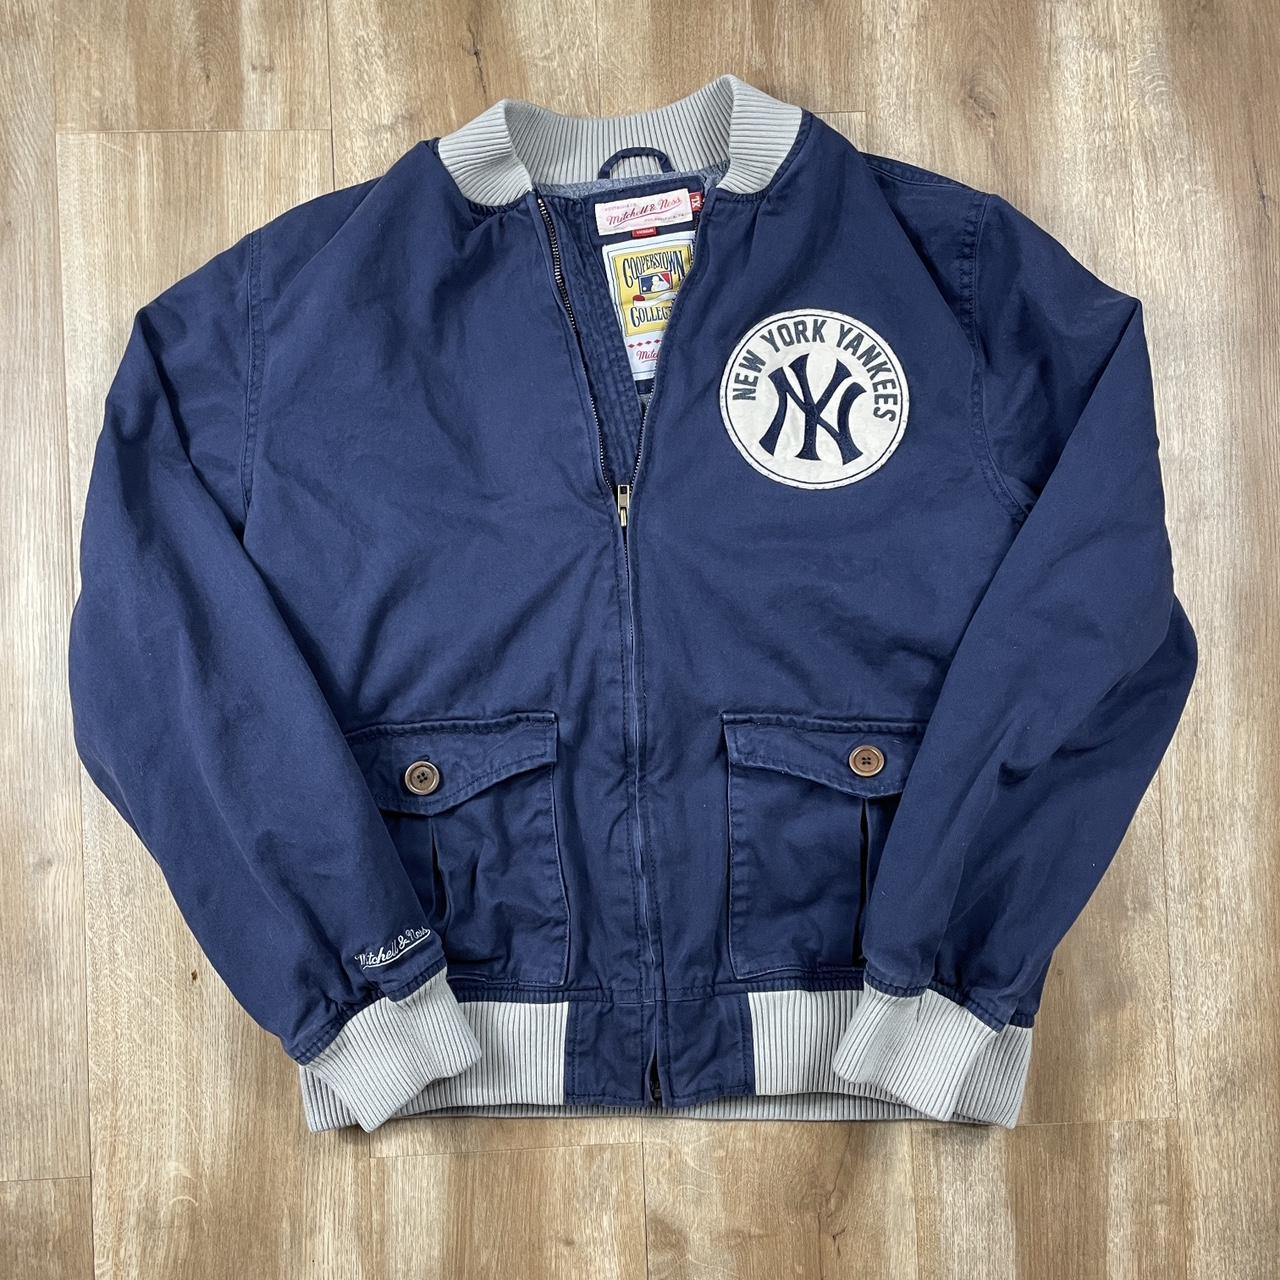 Mitchell & Ness New York Yankees Jacket Cooperstown Collection